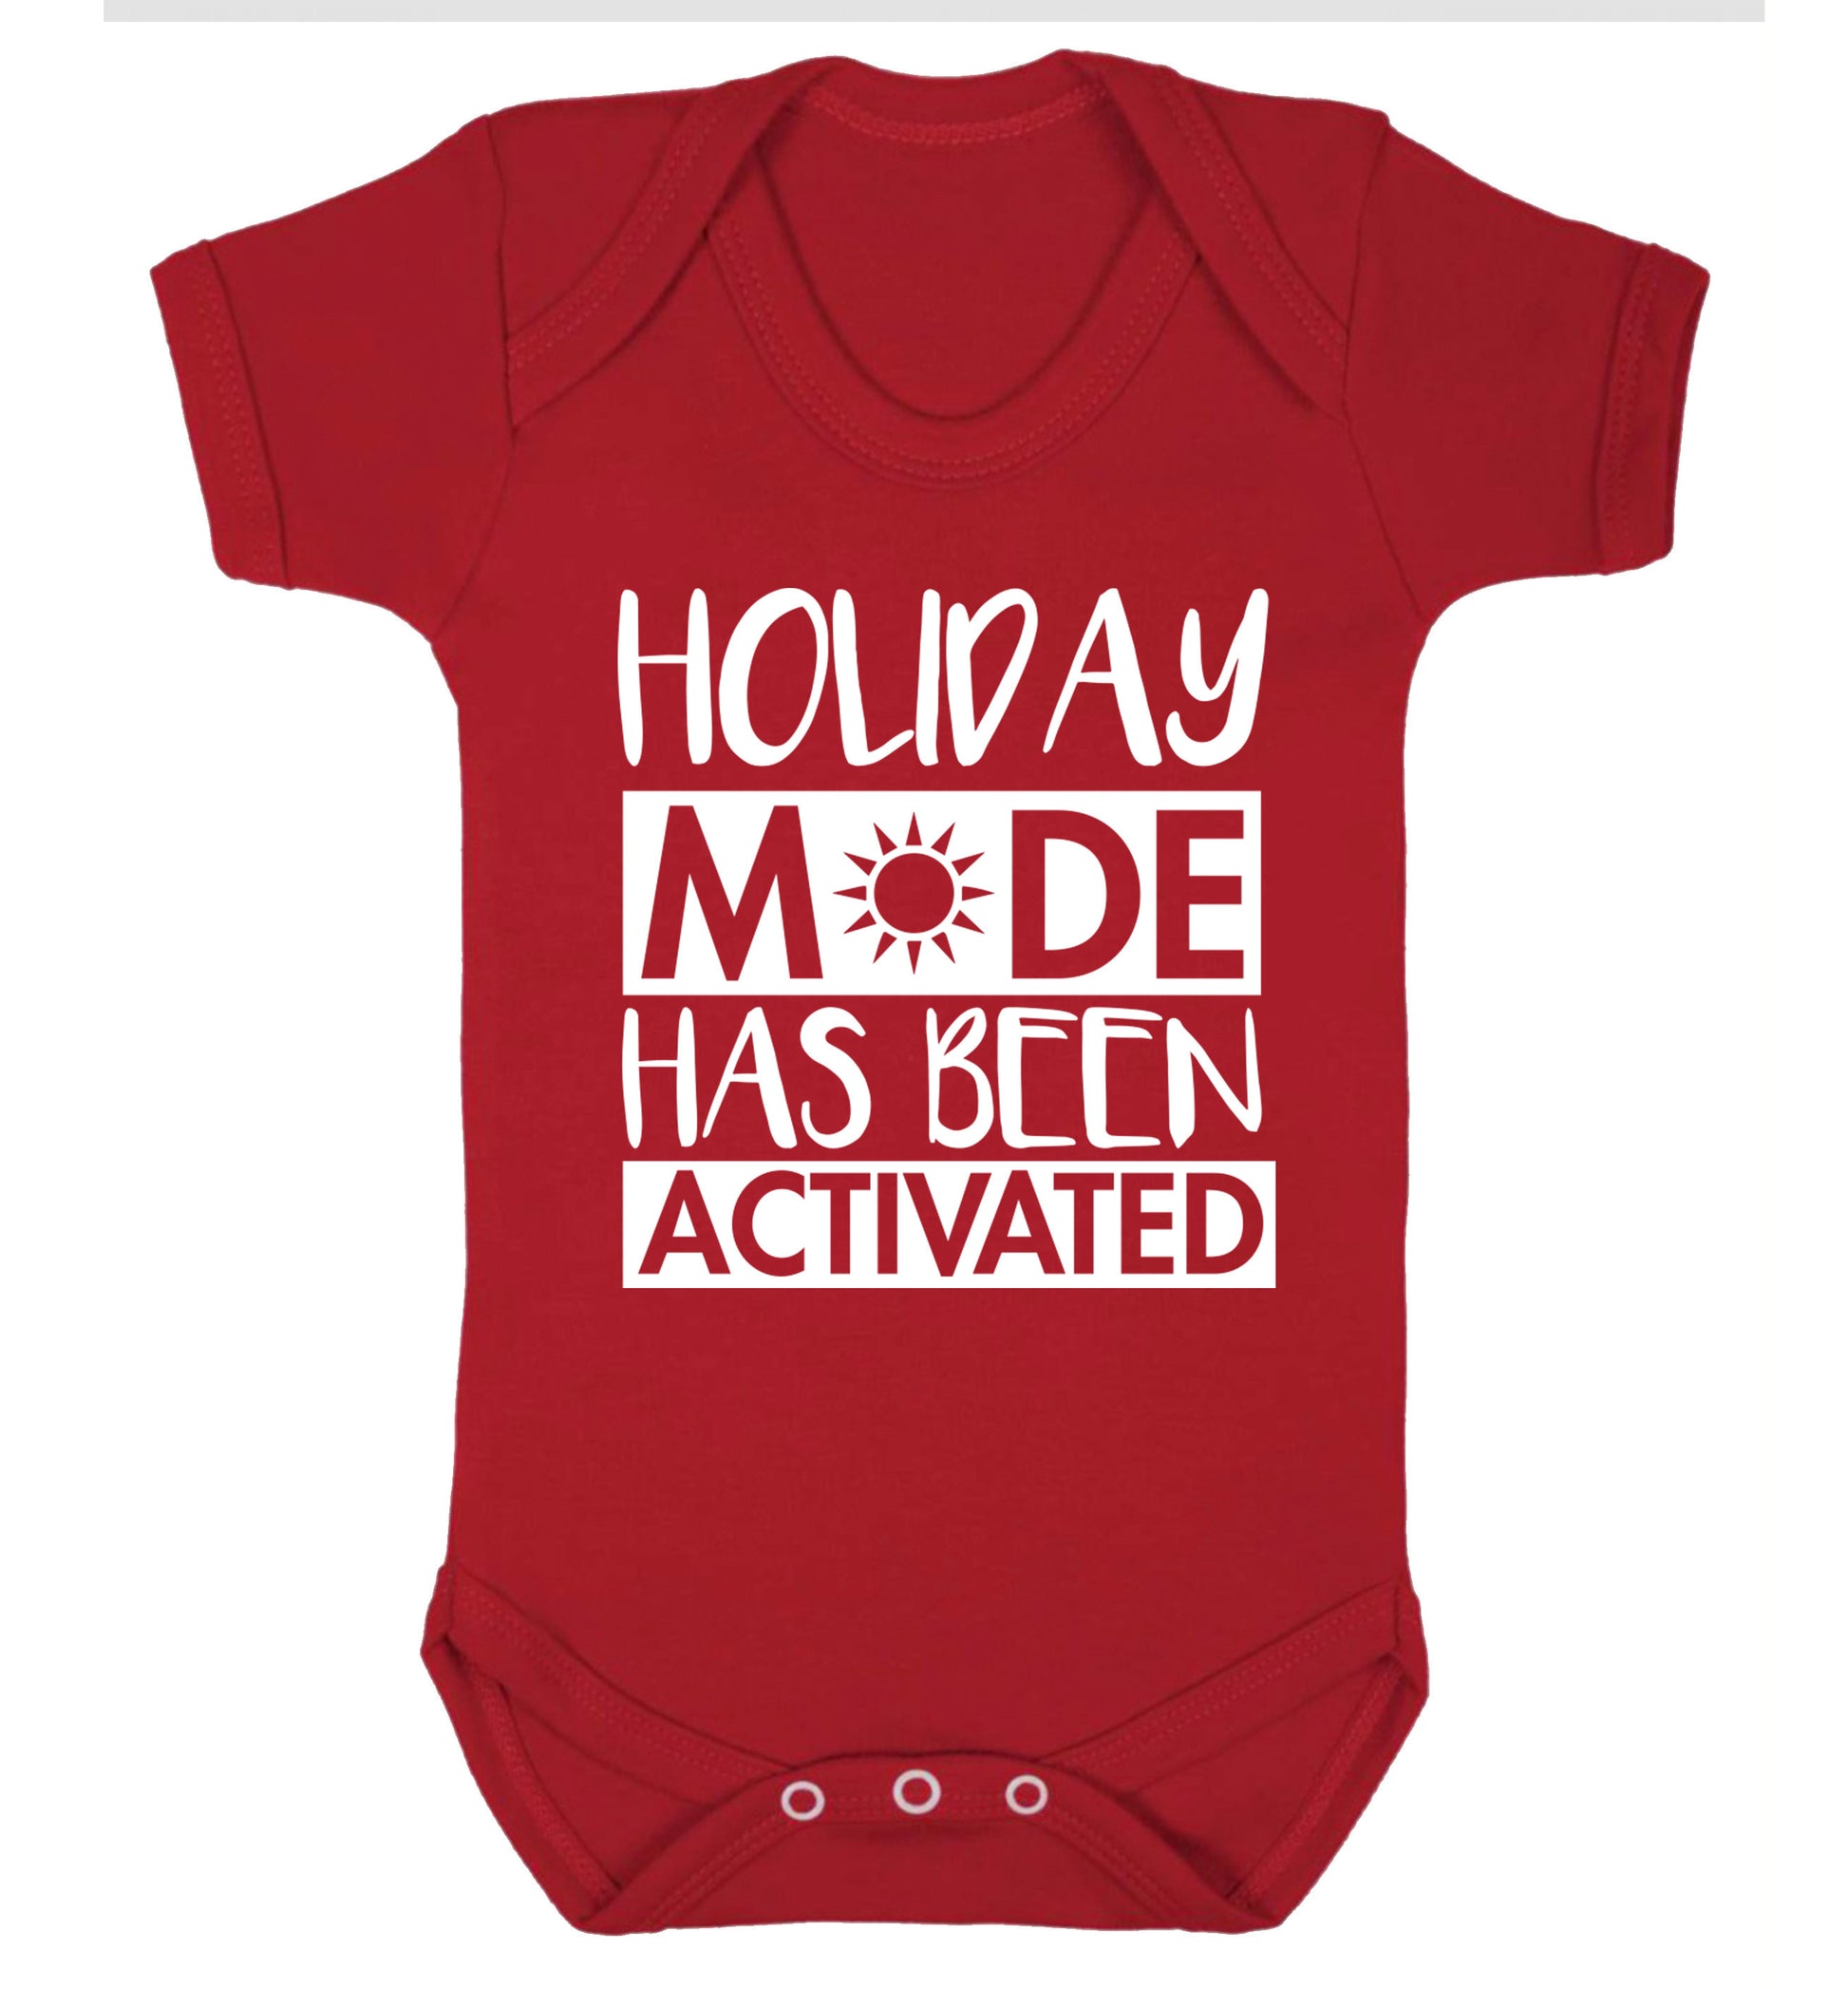 Holiday mode has been activated Baby Vest red 18-24 months